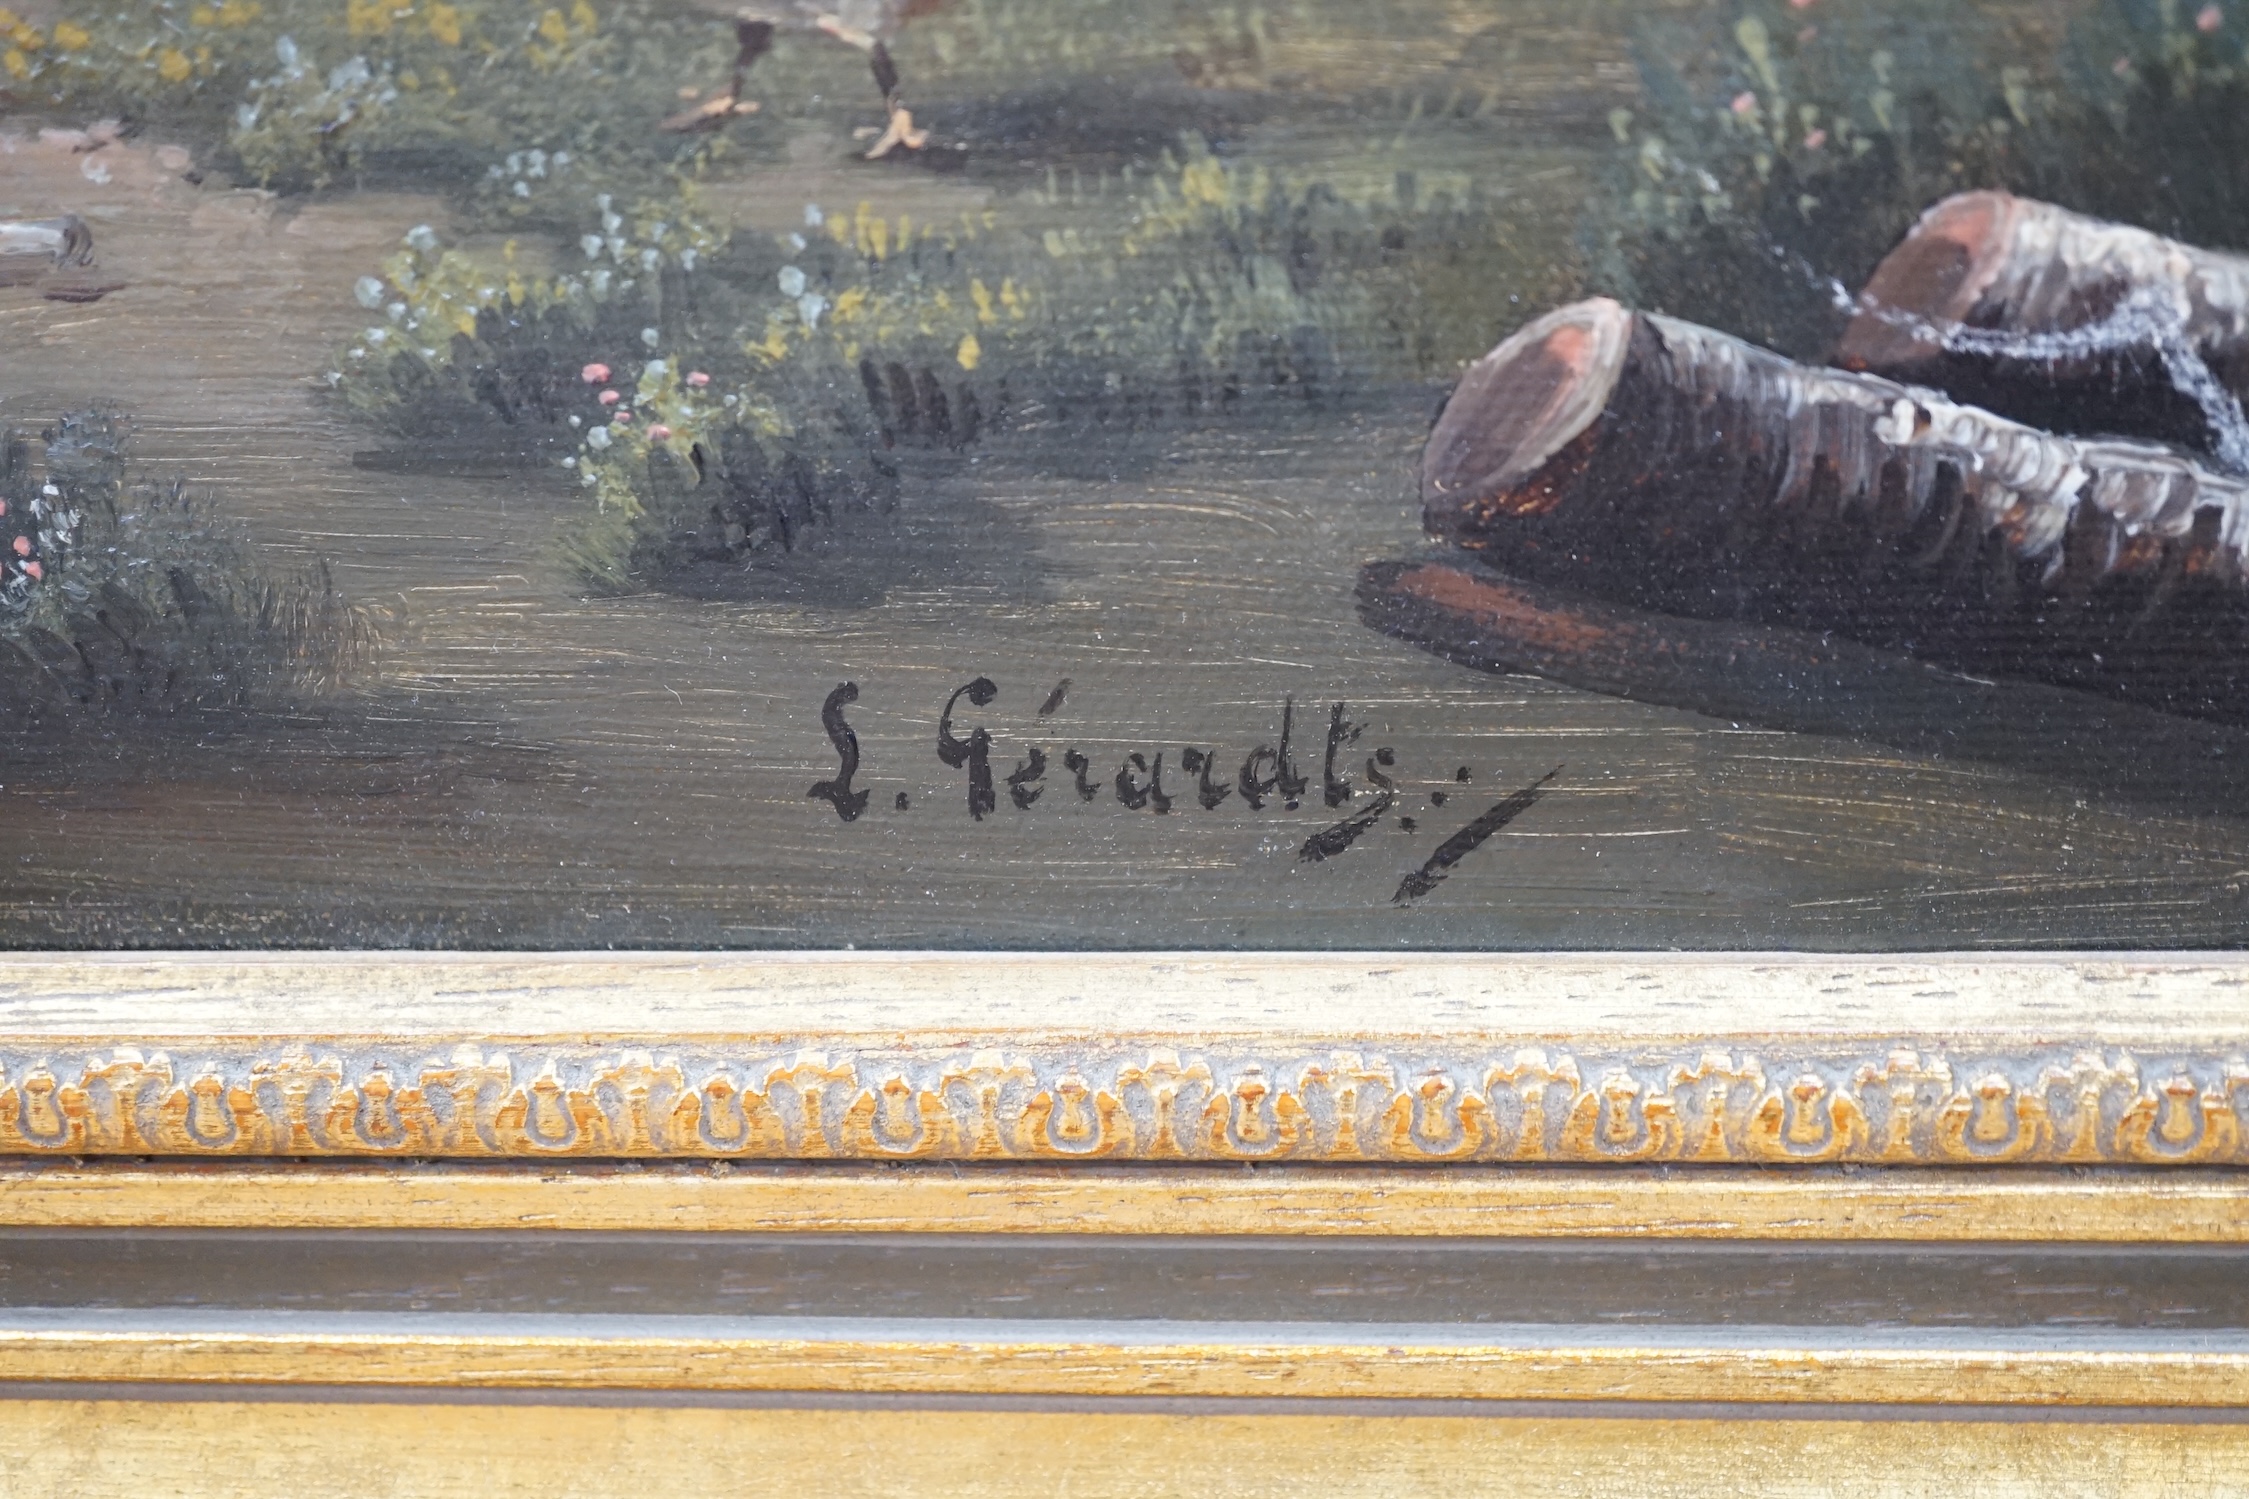 L. Gerardts (Dutch), pair of oils on canvas, Chickens before landscapes, signed, 24 x 34cm. Condition - fair to good